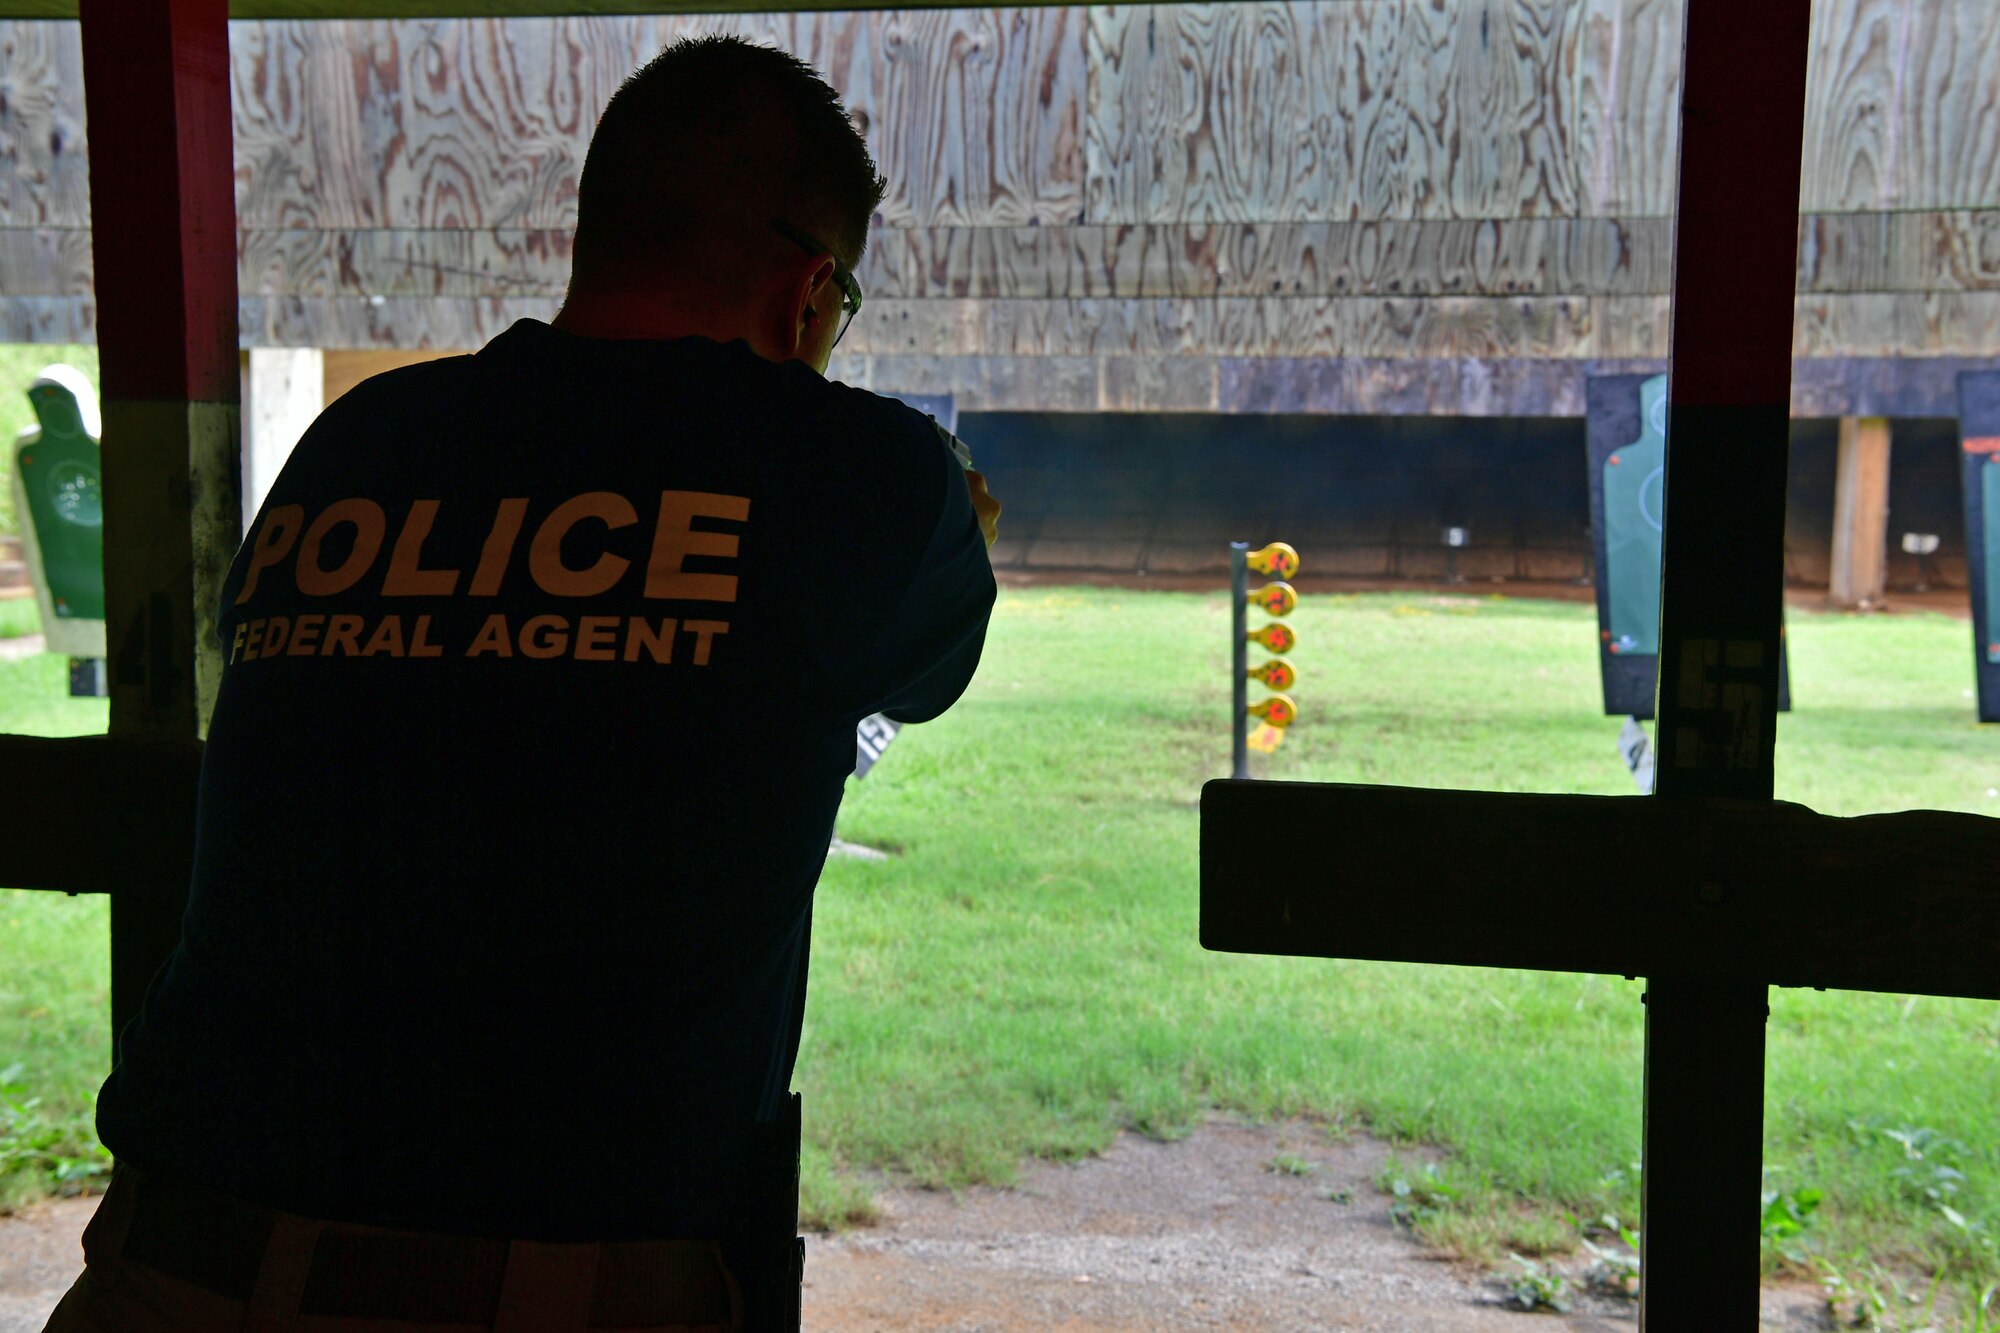 Special Agent Ciccgetto shoots at the range.